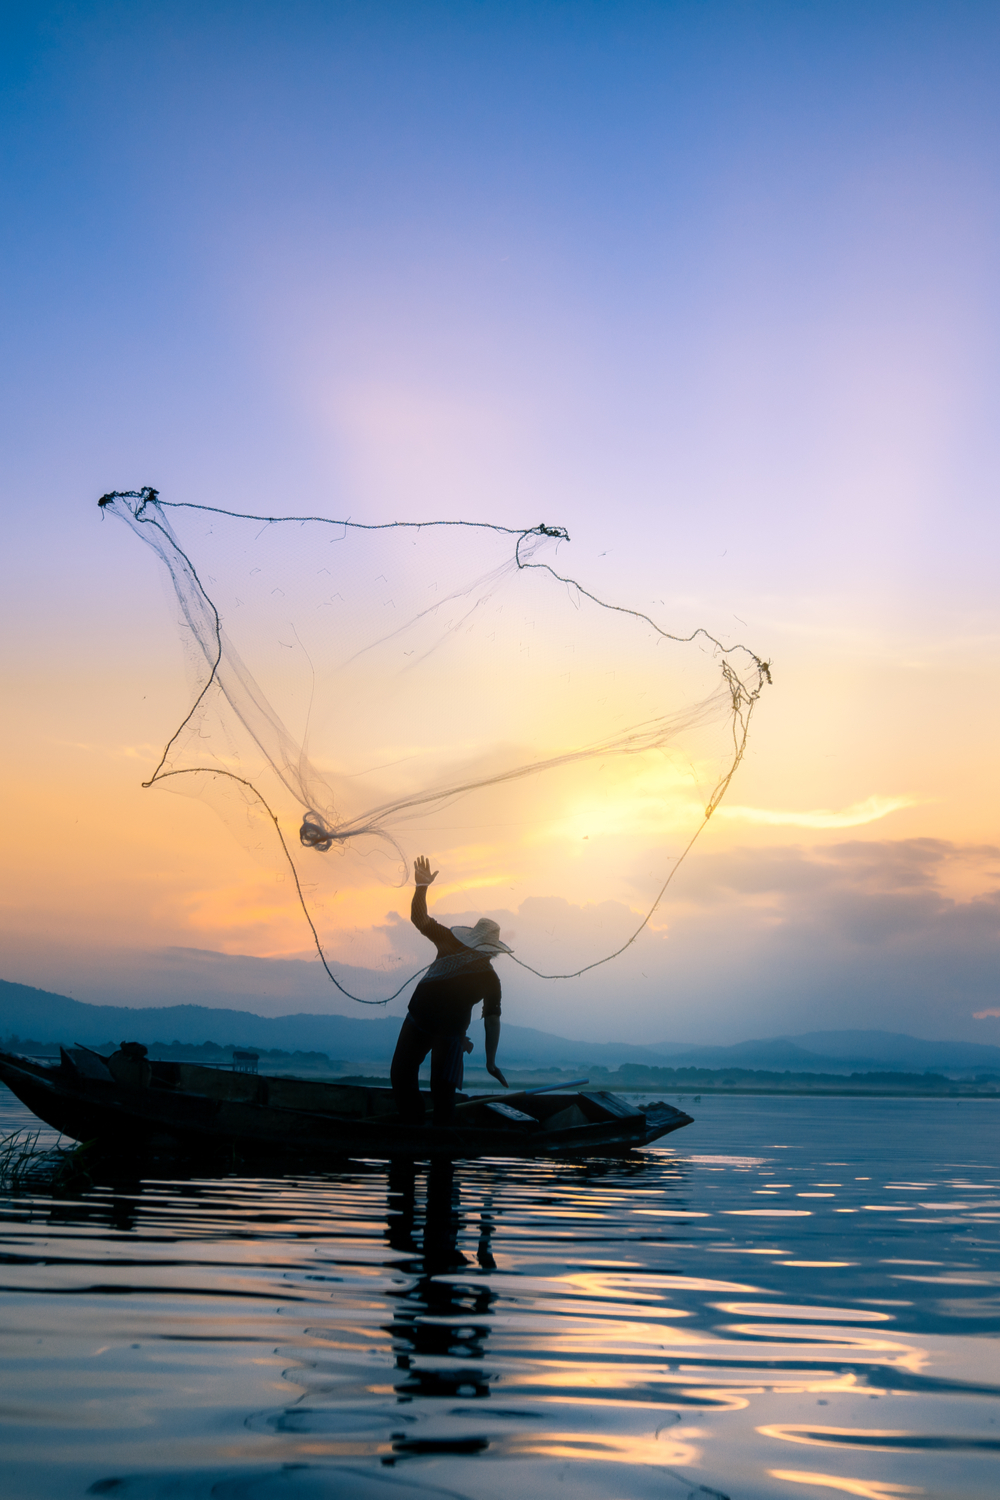 Dreaming about catching a fish with a fishing net